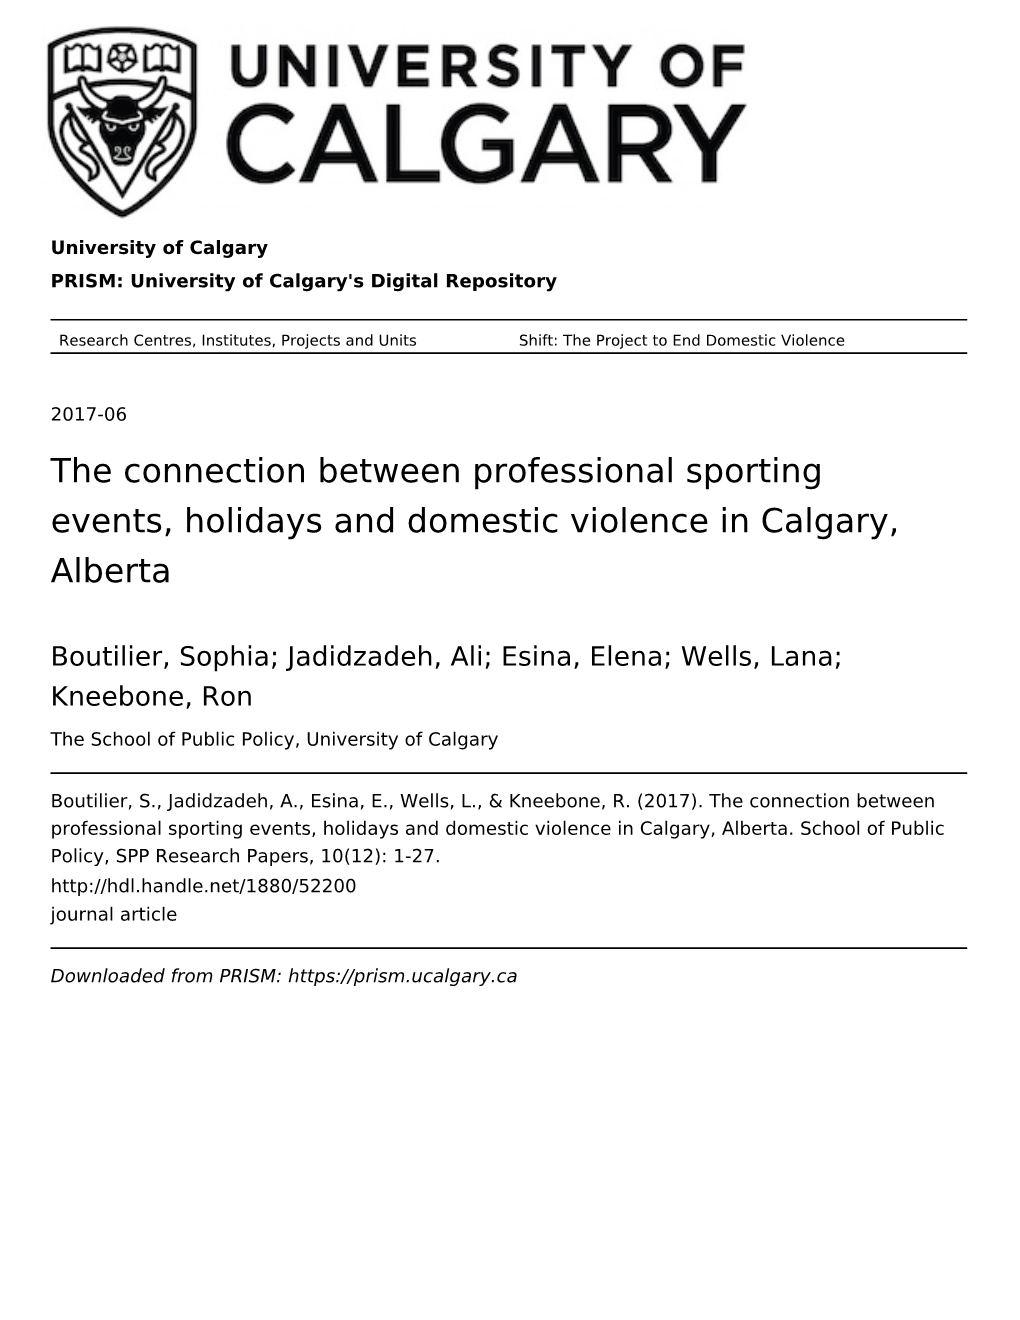 The Connection Between Professional Sporting Events, Holidays and Domestic Violence in Calgary, Alberta